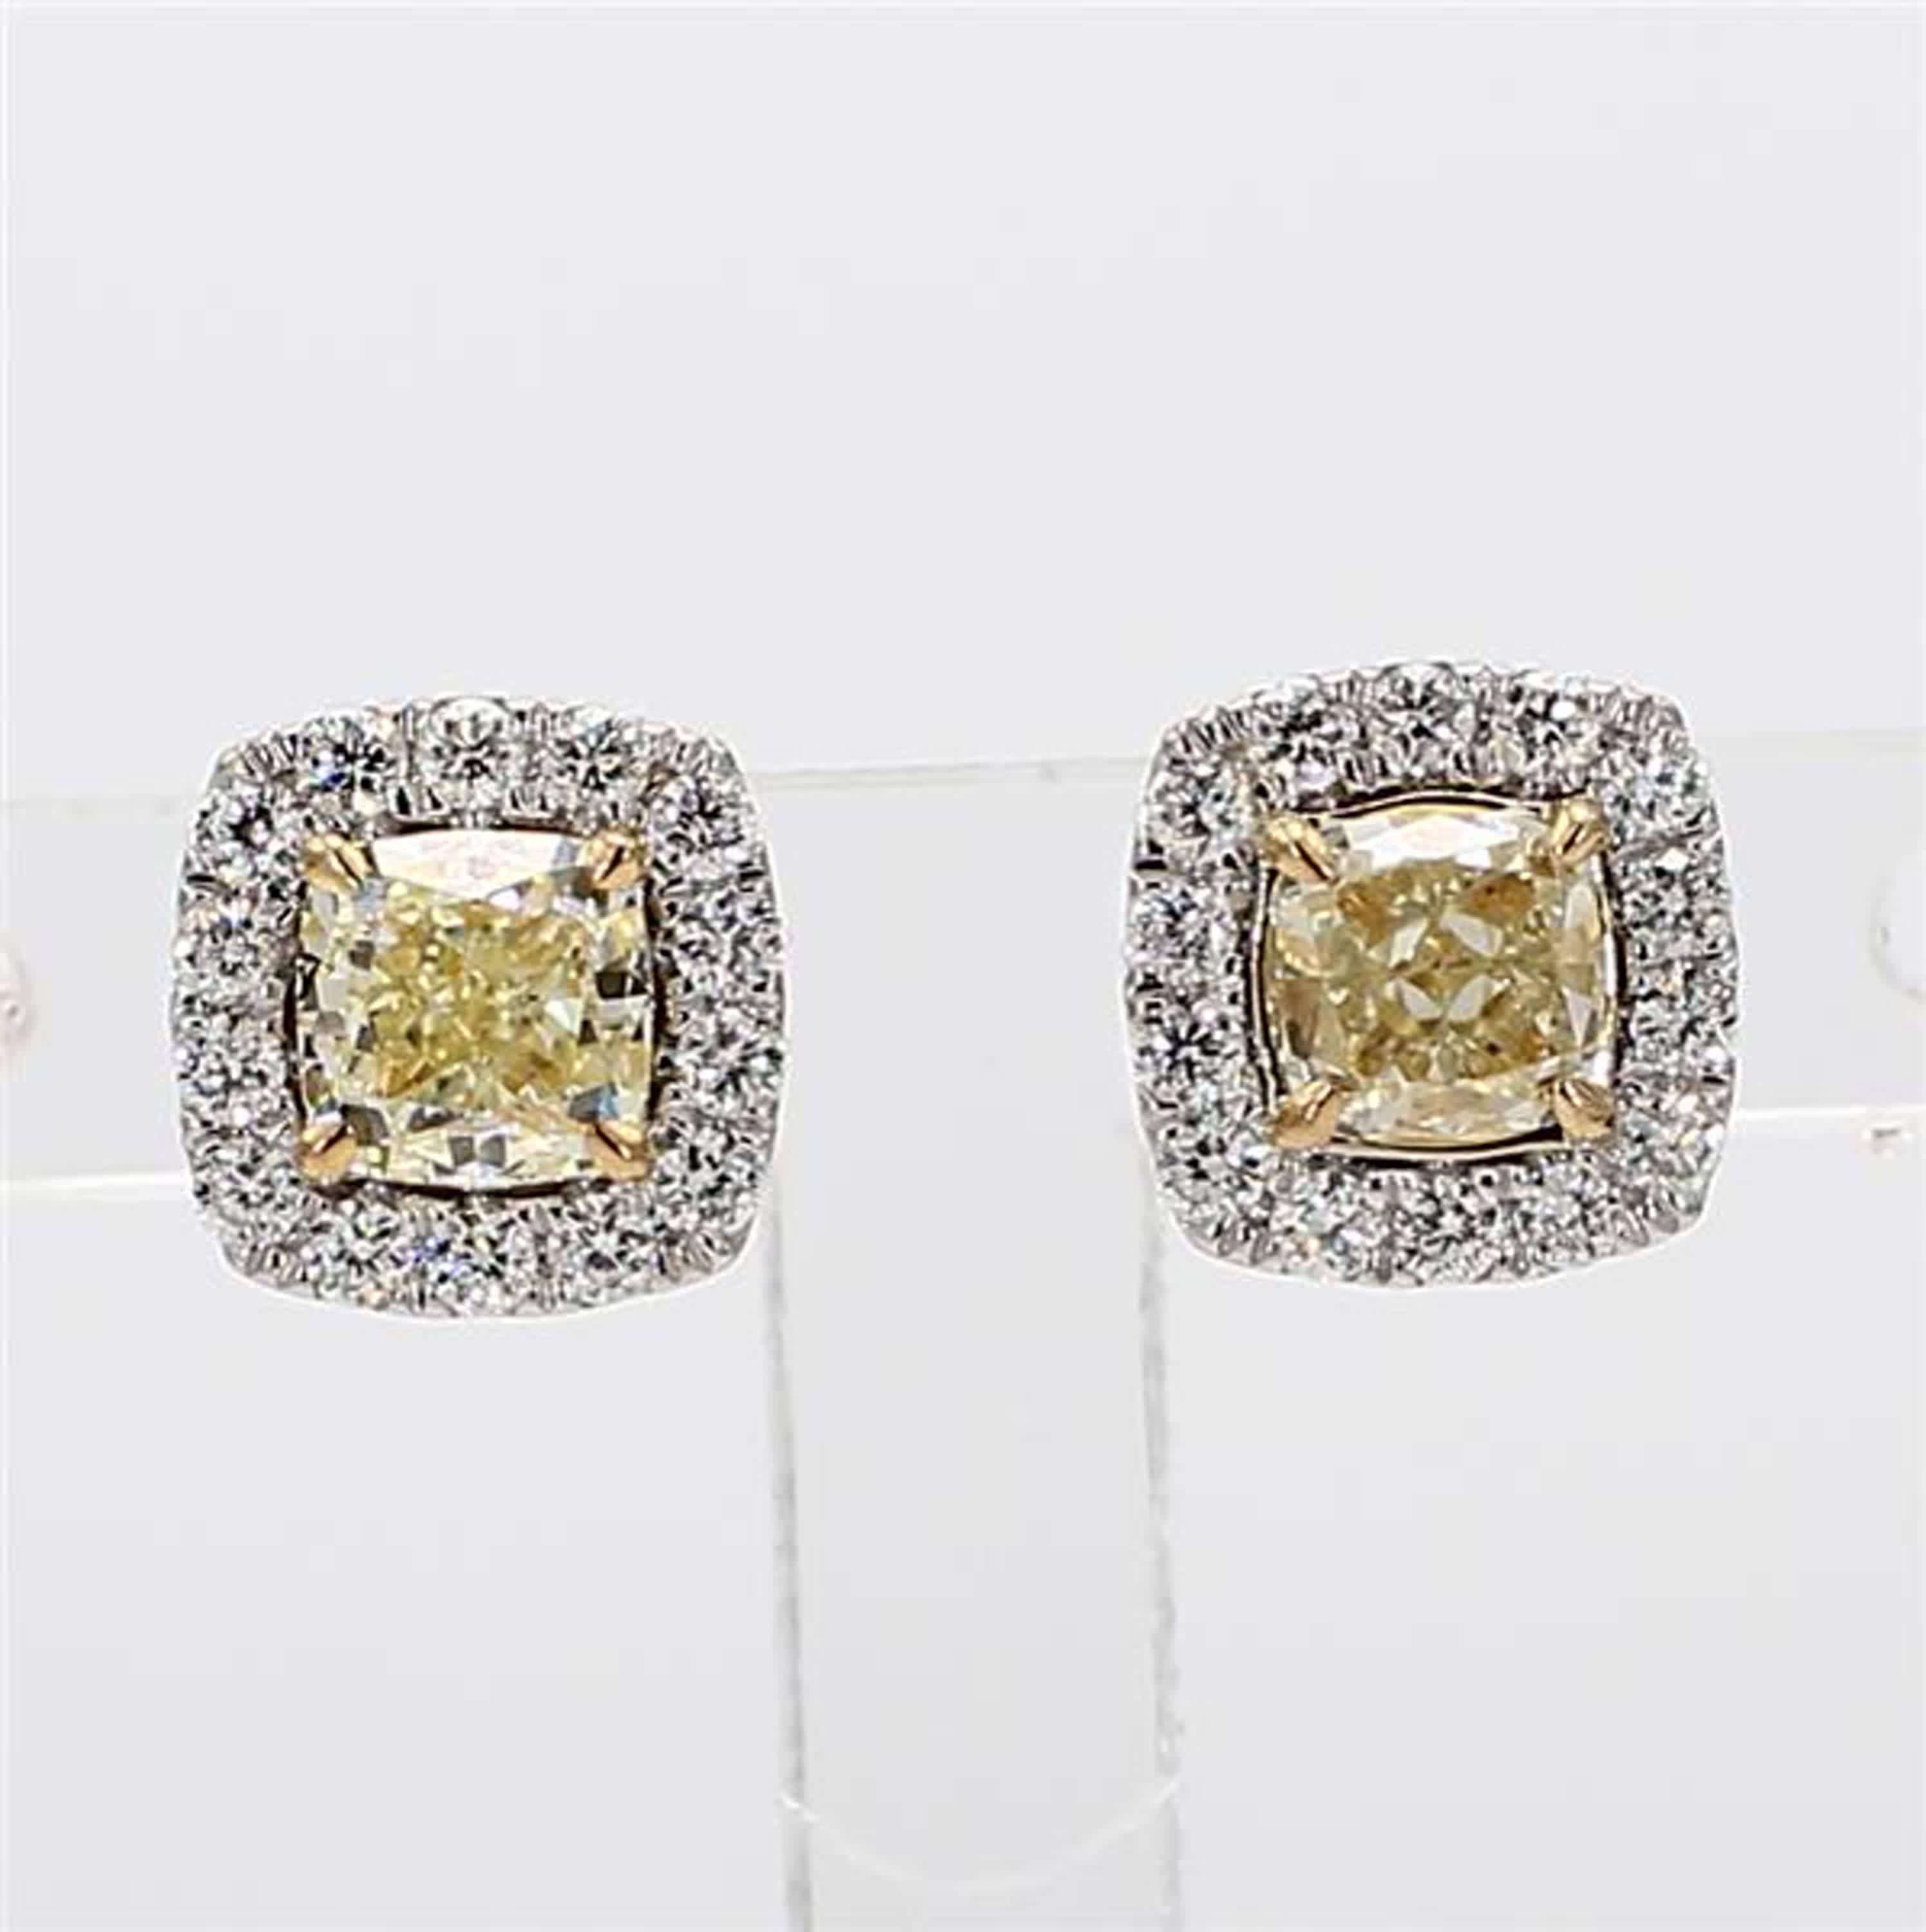 Natural Yellow Cushion and White Diamond 1.25 Carat TW Gold Stud Earrings 7